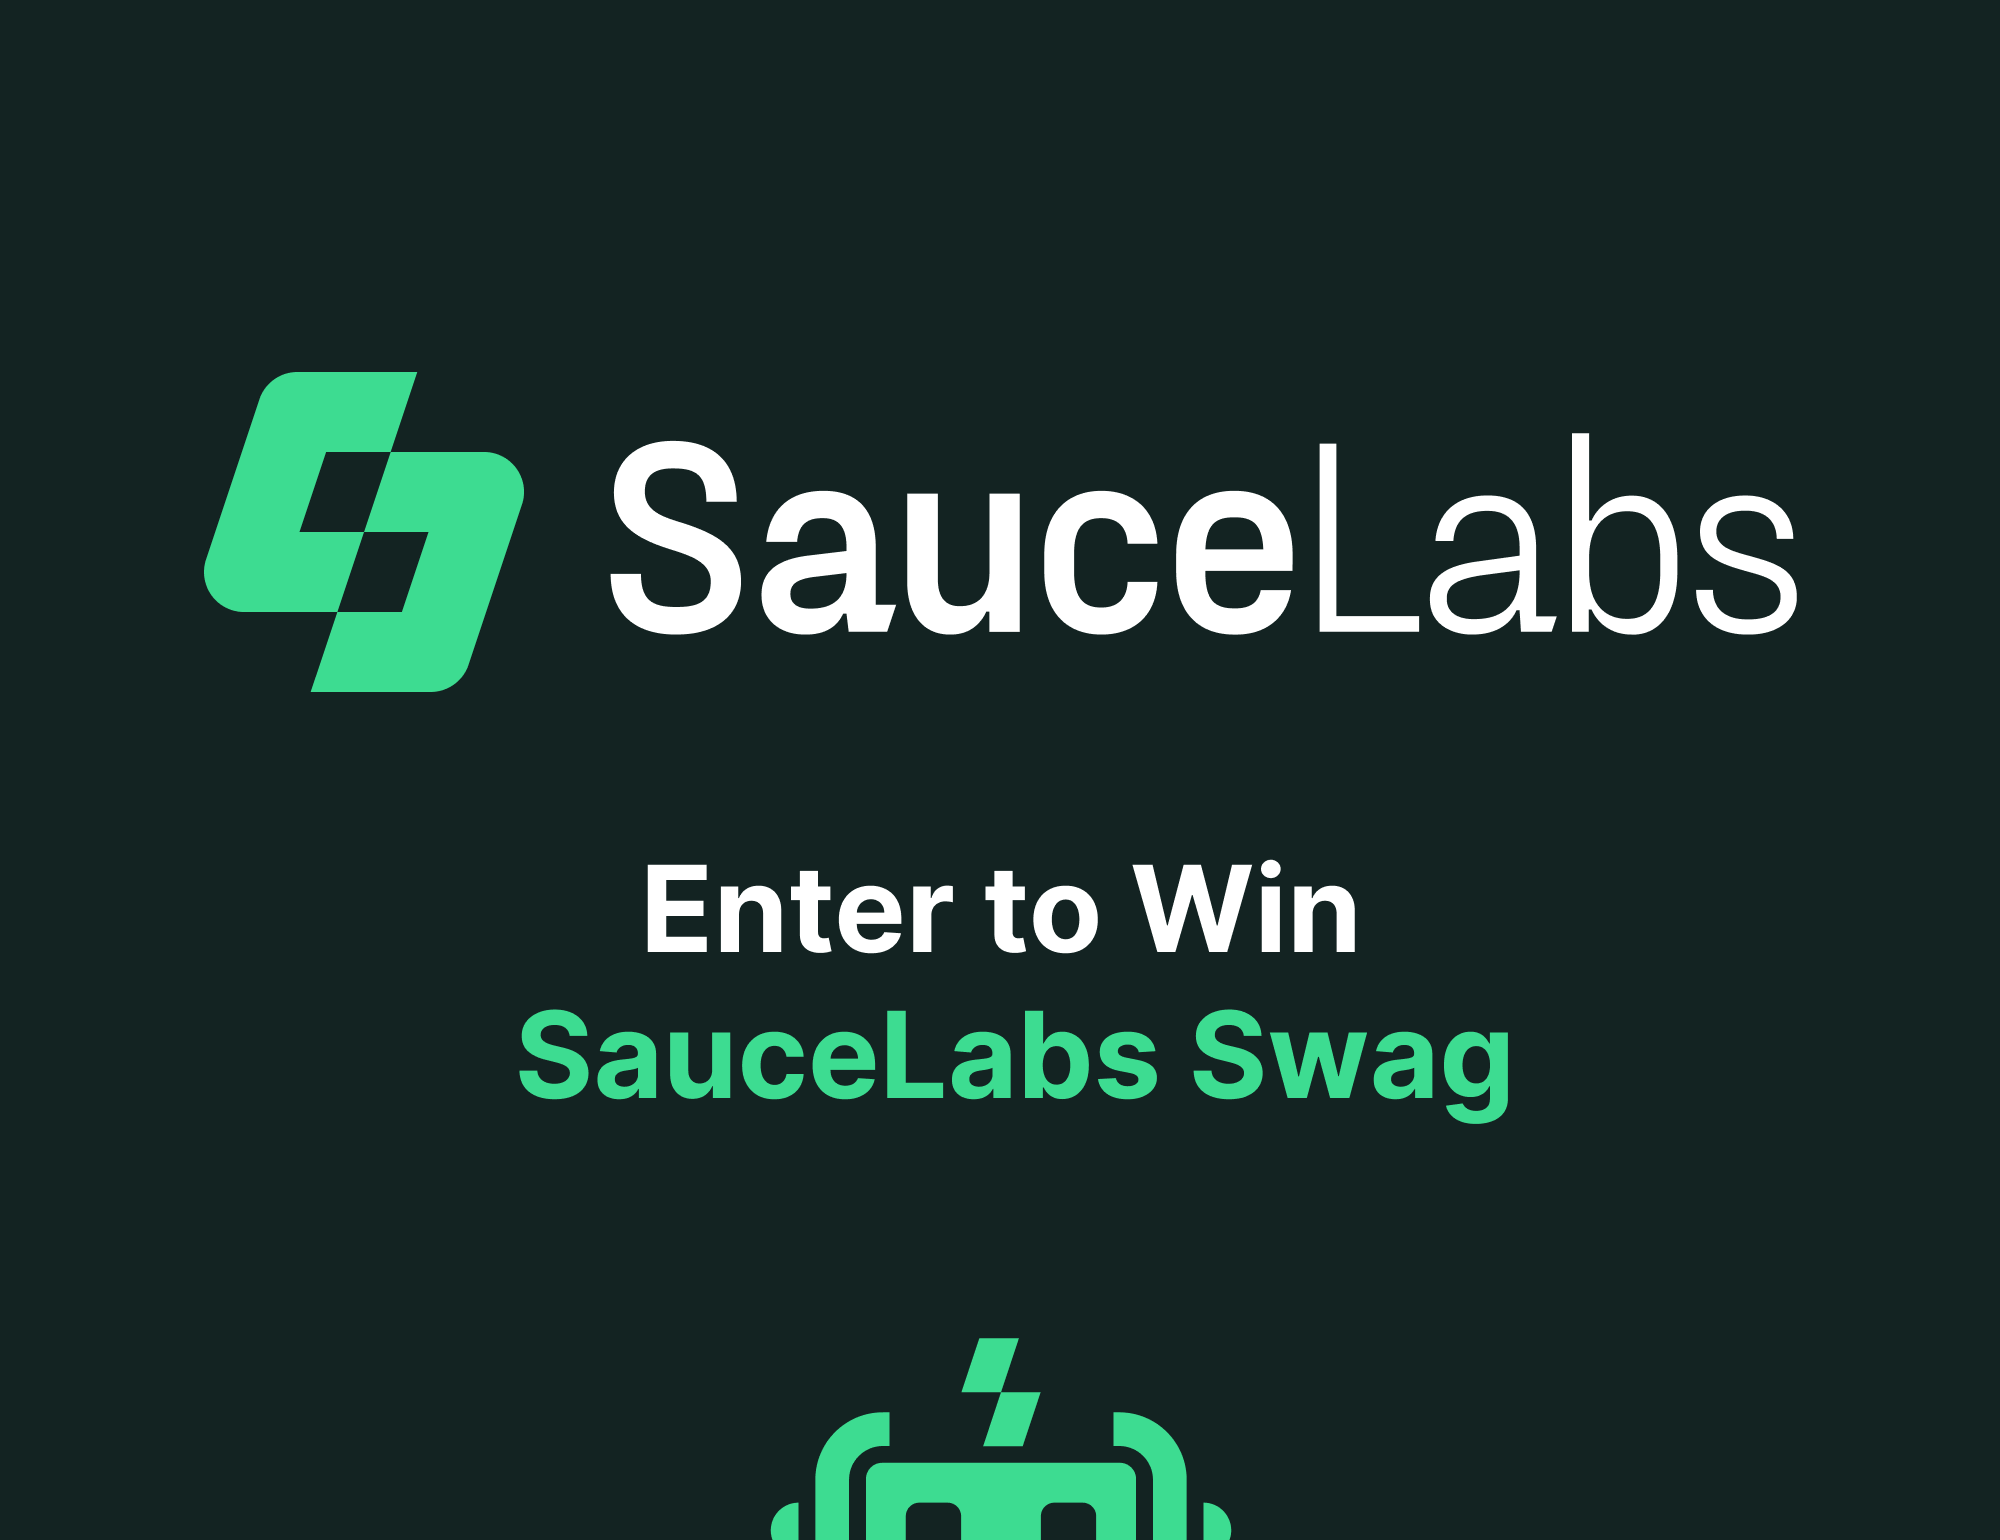 Sign up for the Sauce Labs Workshop and be entered to win a Swag Bag!